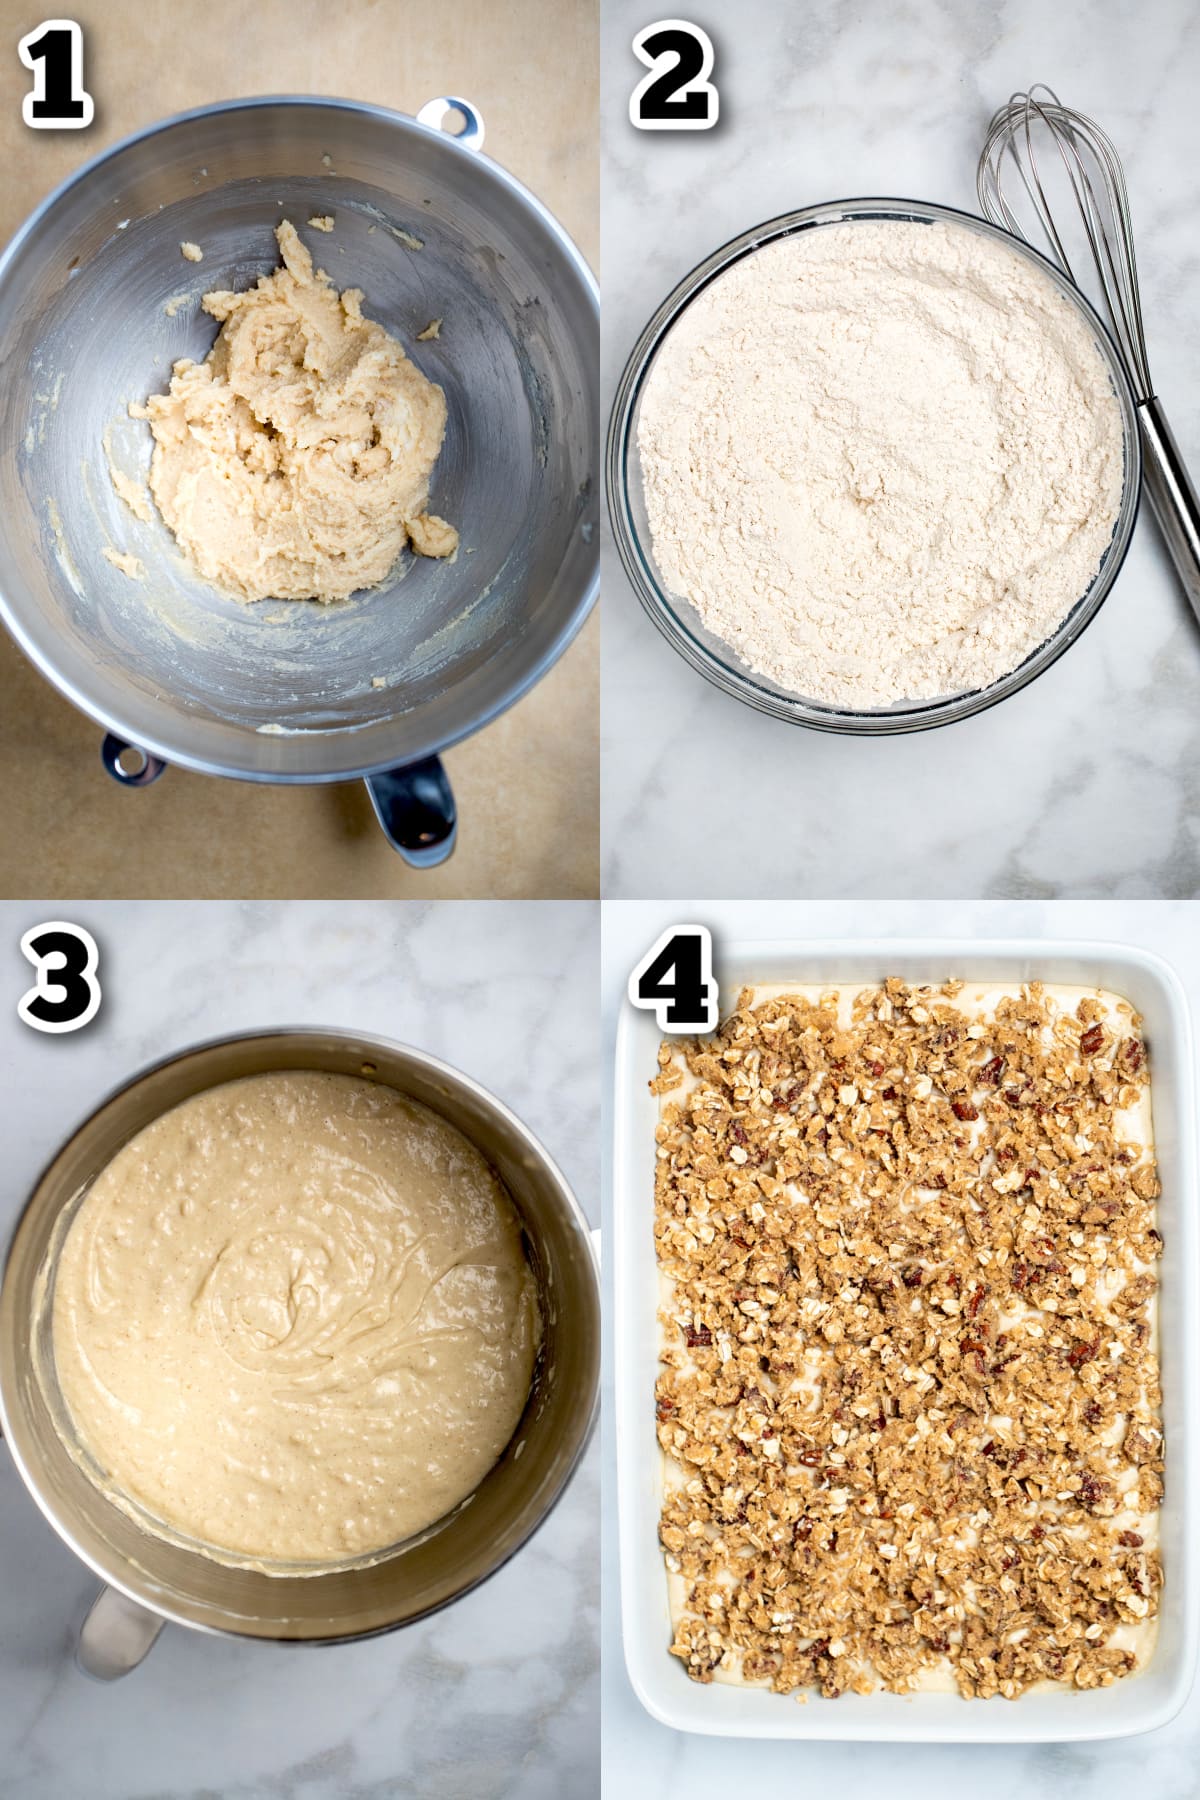 Step by step photos for how to make gluten free coffee cake.